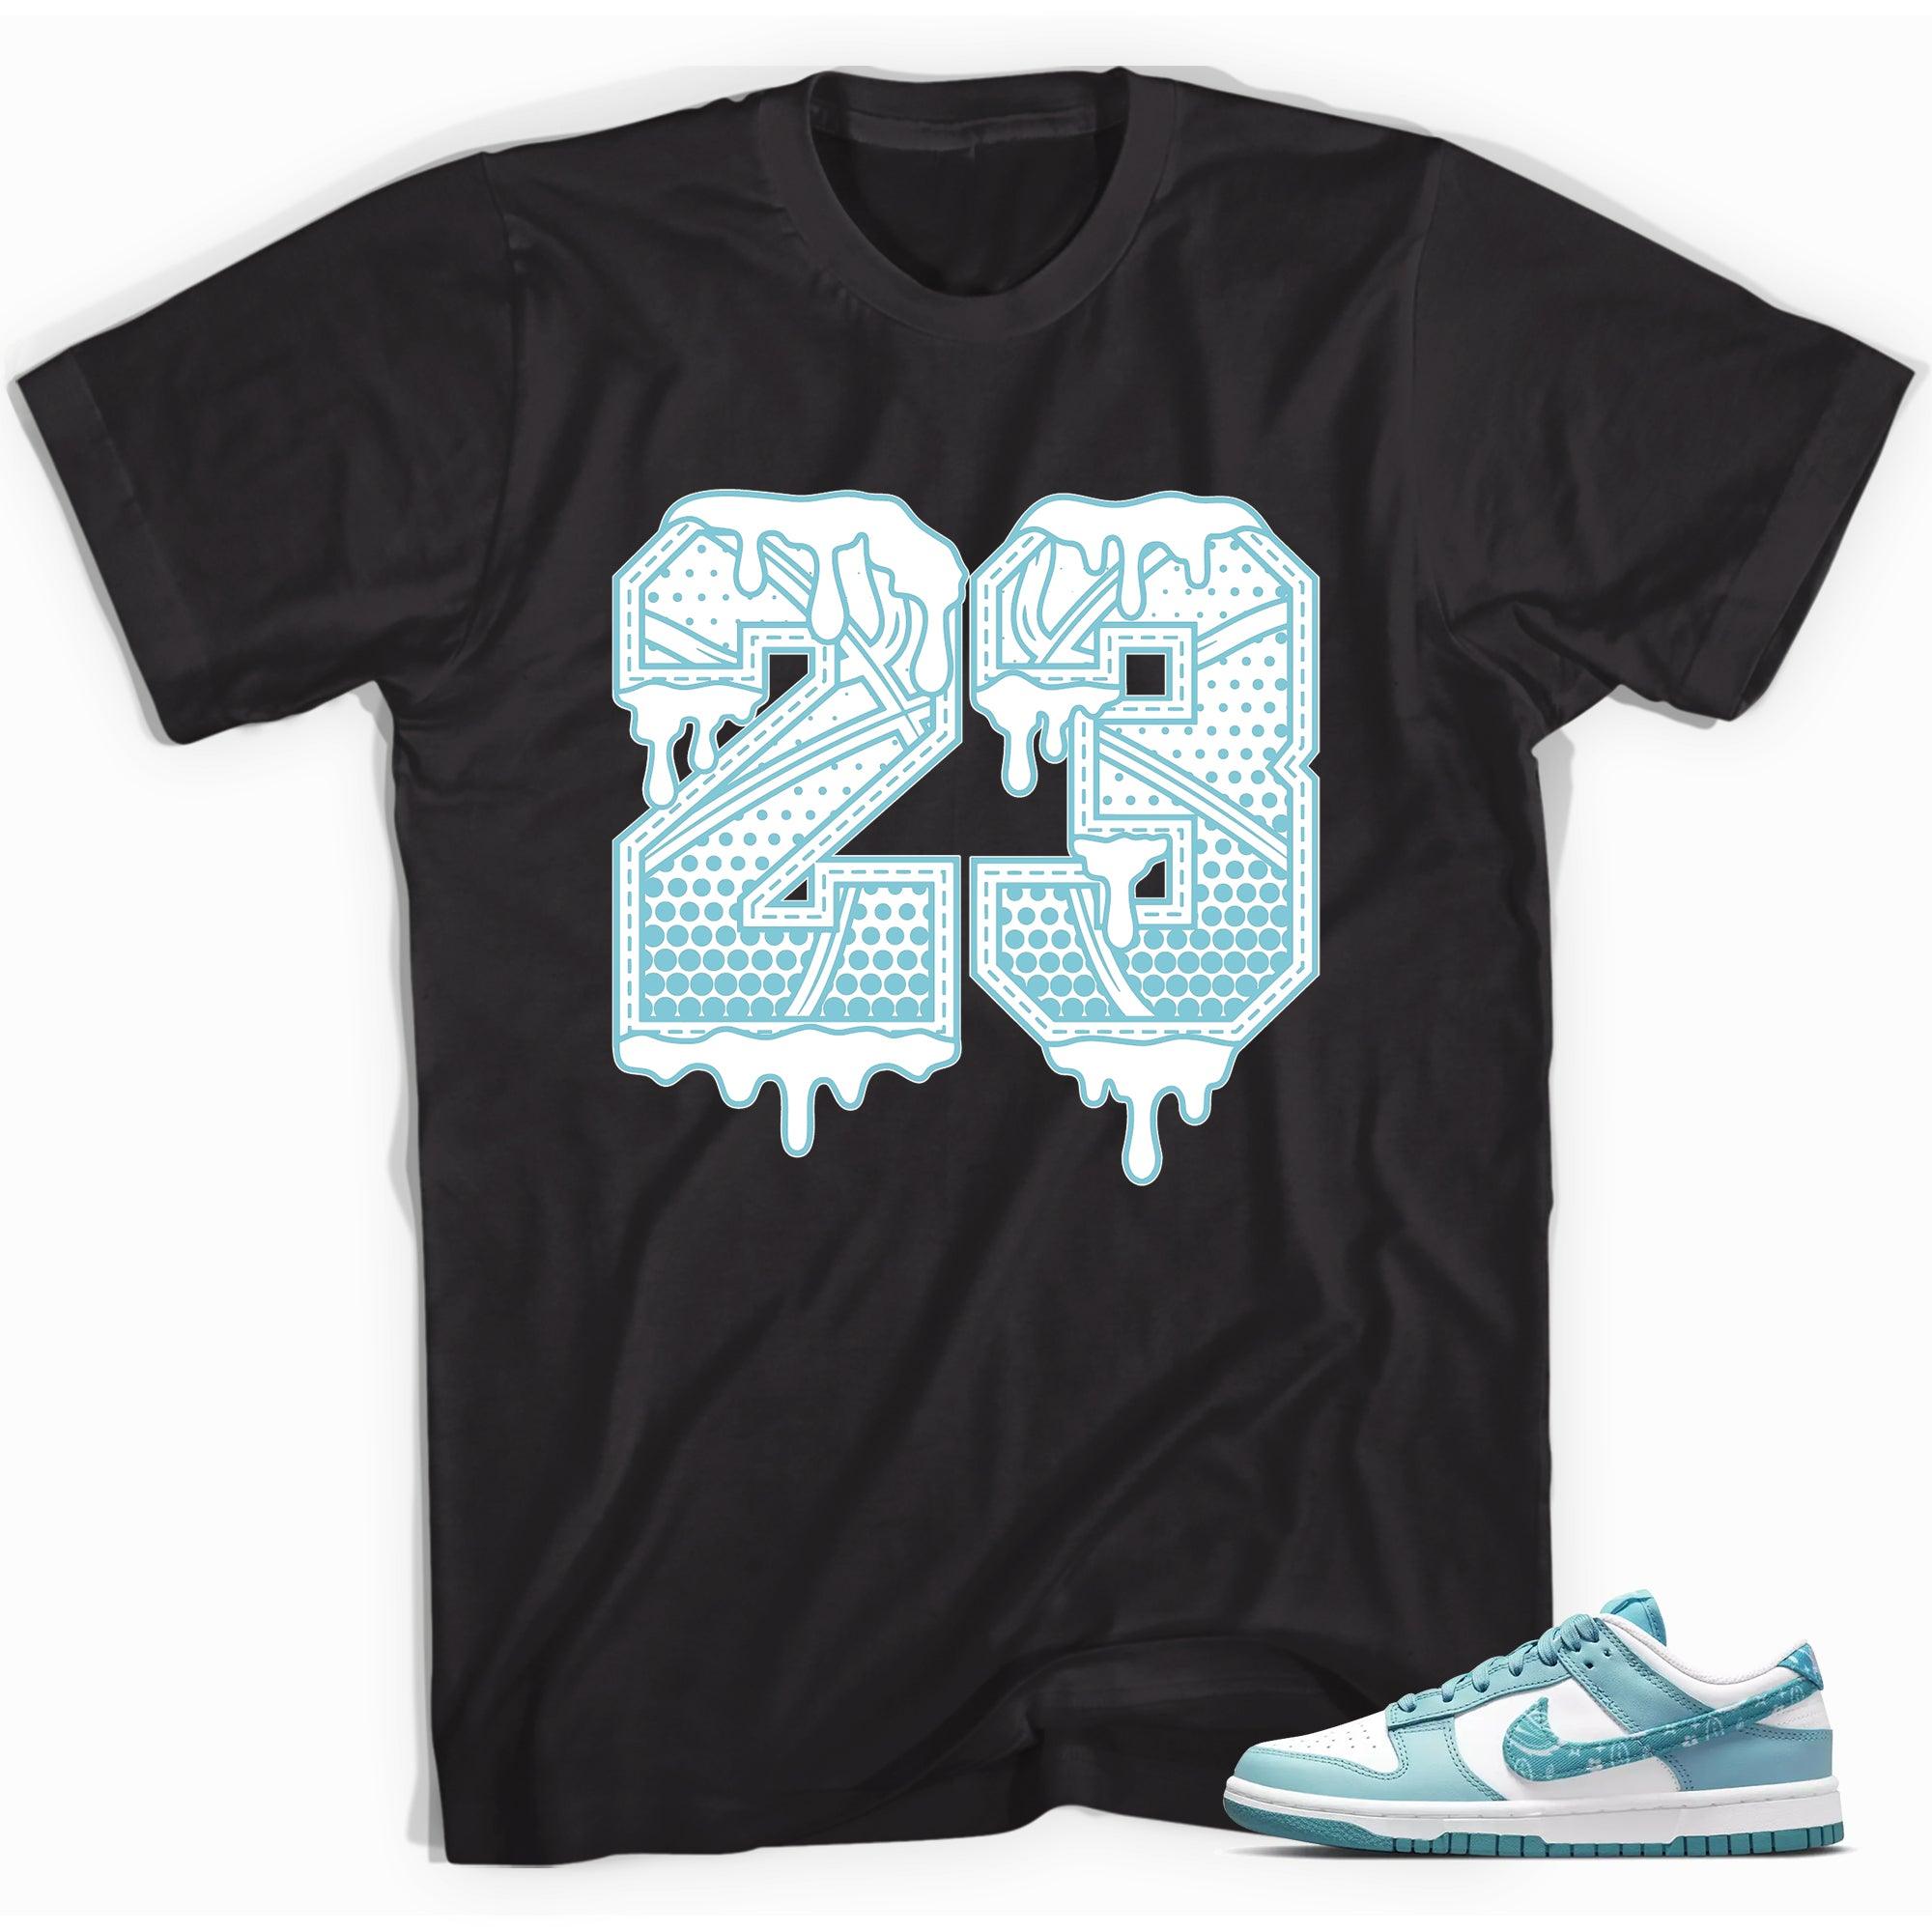 Number 23 Ball Shirt Dunk Low Essential Paisley Pack Worn Blue photo